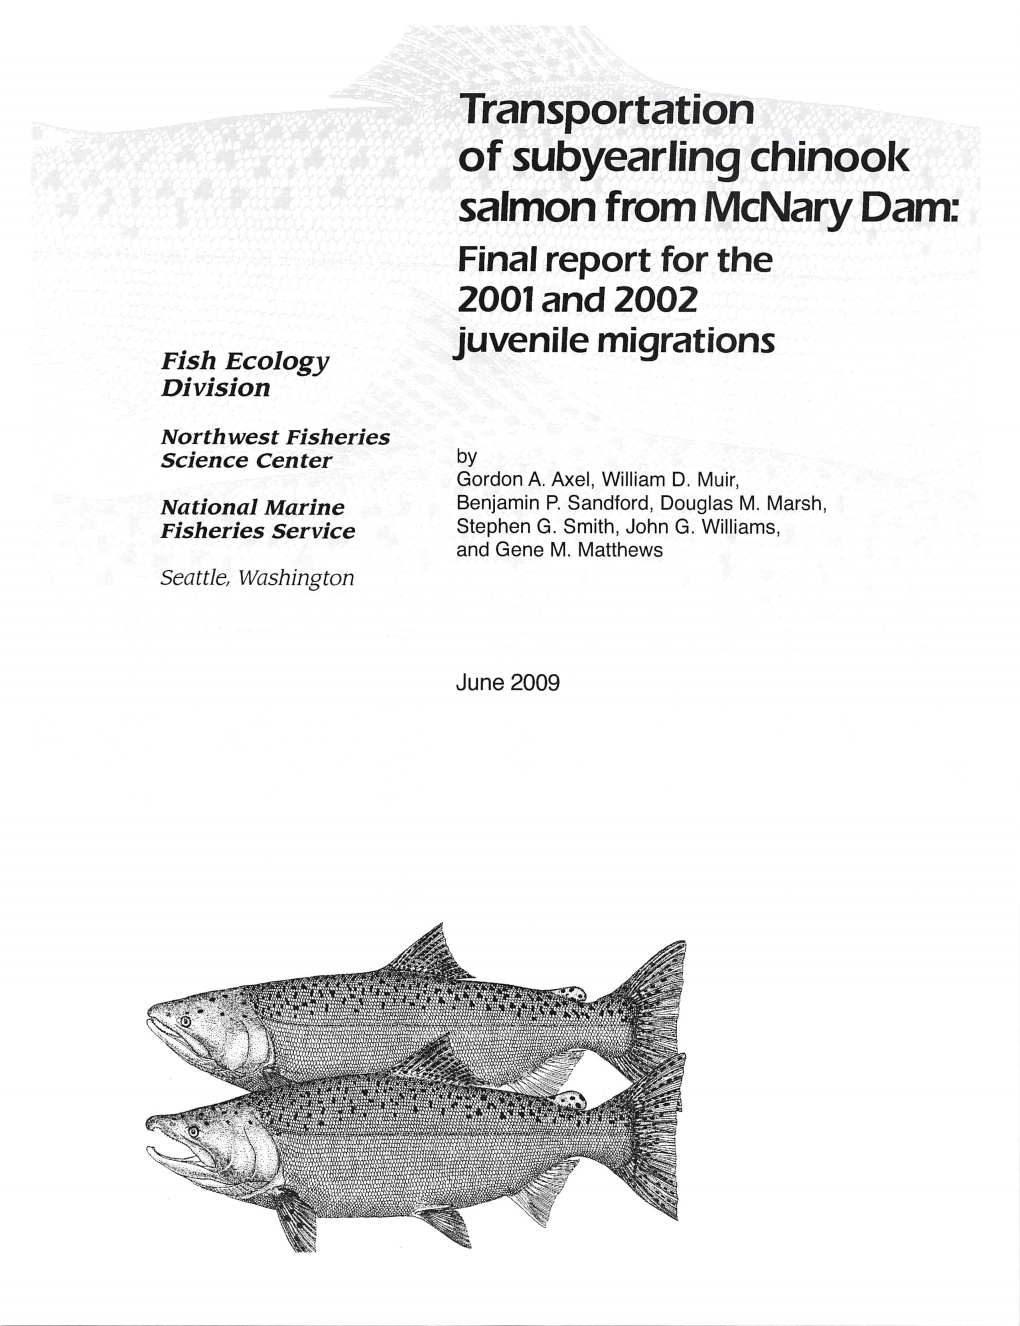 Transportation of Subyearling Chinook Salmon from Mcnary Dam: Final Report for the 2001 and 2002 Juvenile Migrations